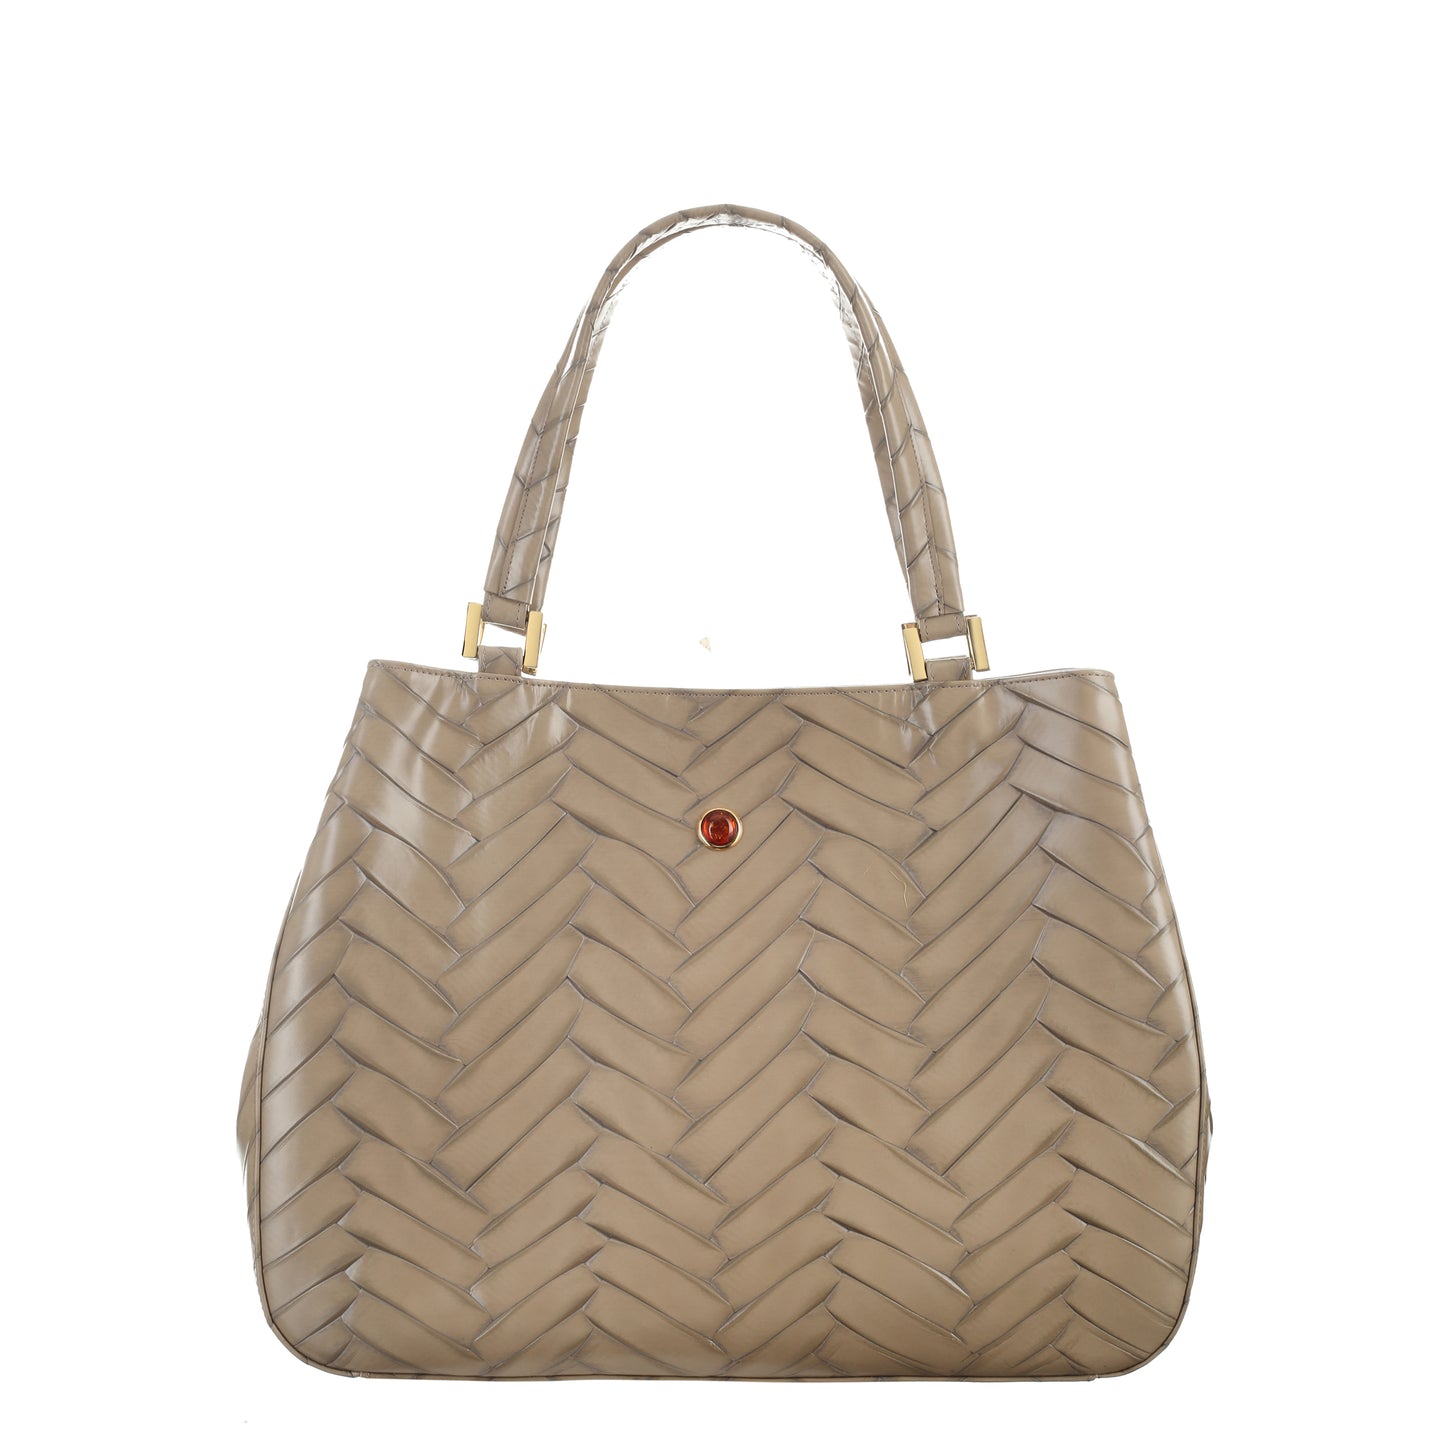 Women's leather bag Mamma braid taupe